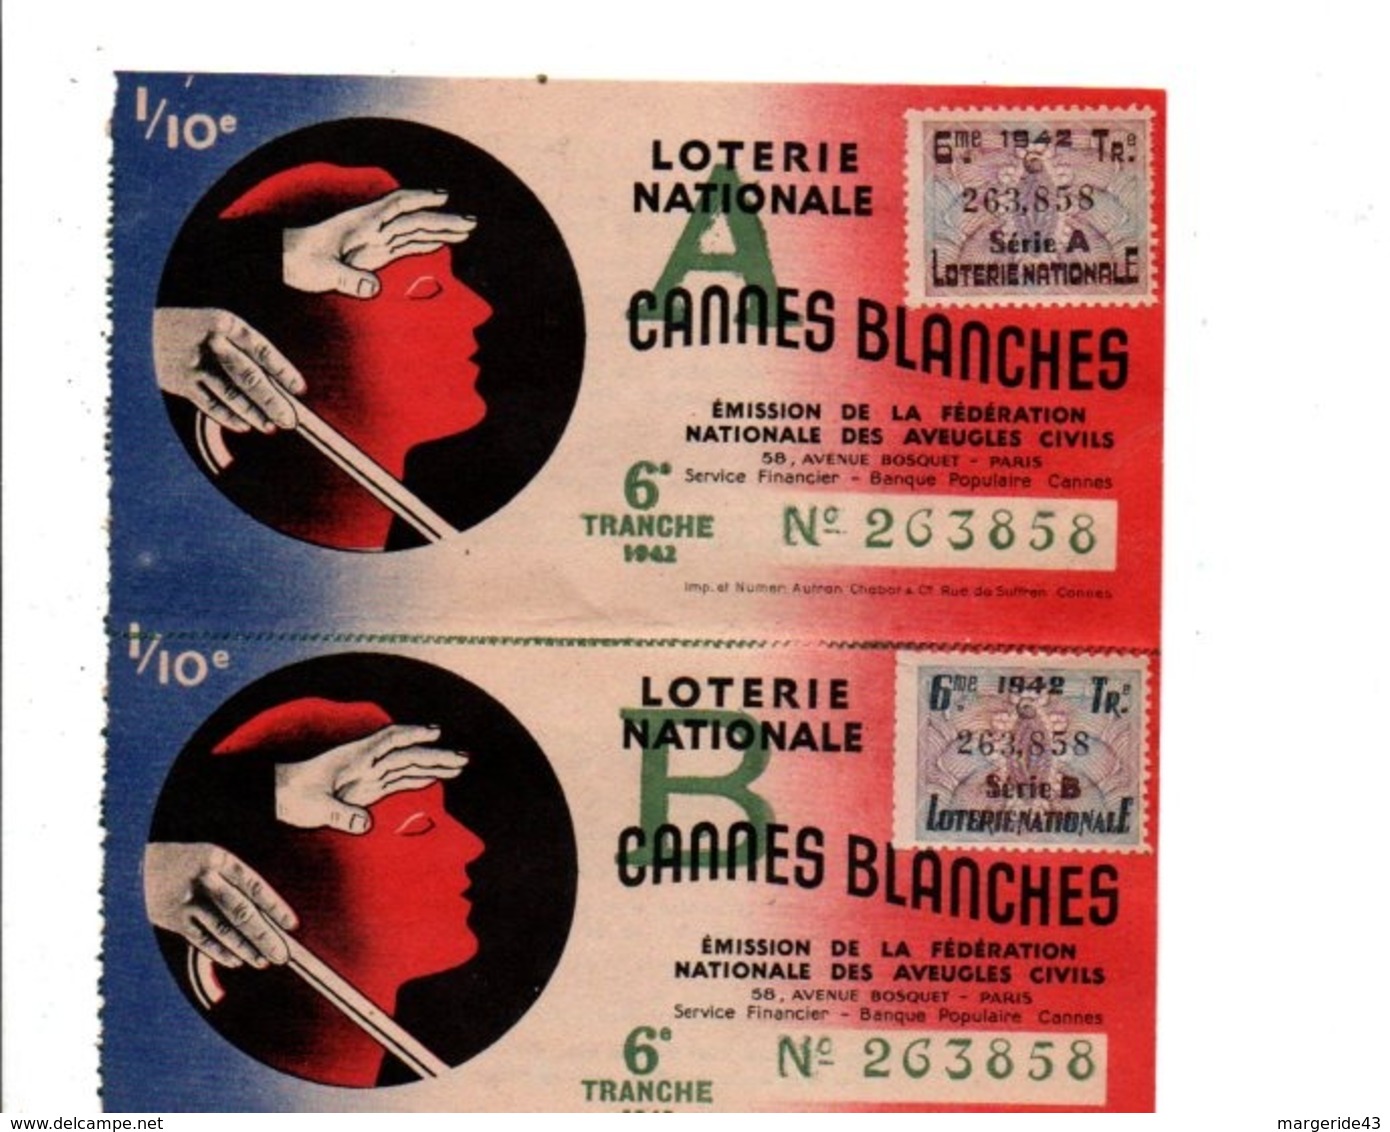 LOTERIE NATIONALE CANNES BLANCHES 1942 - Lottery Tickets